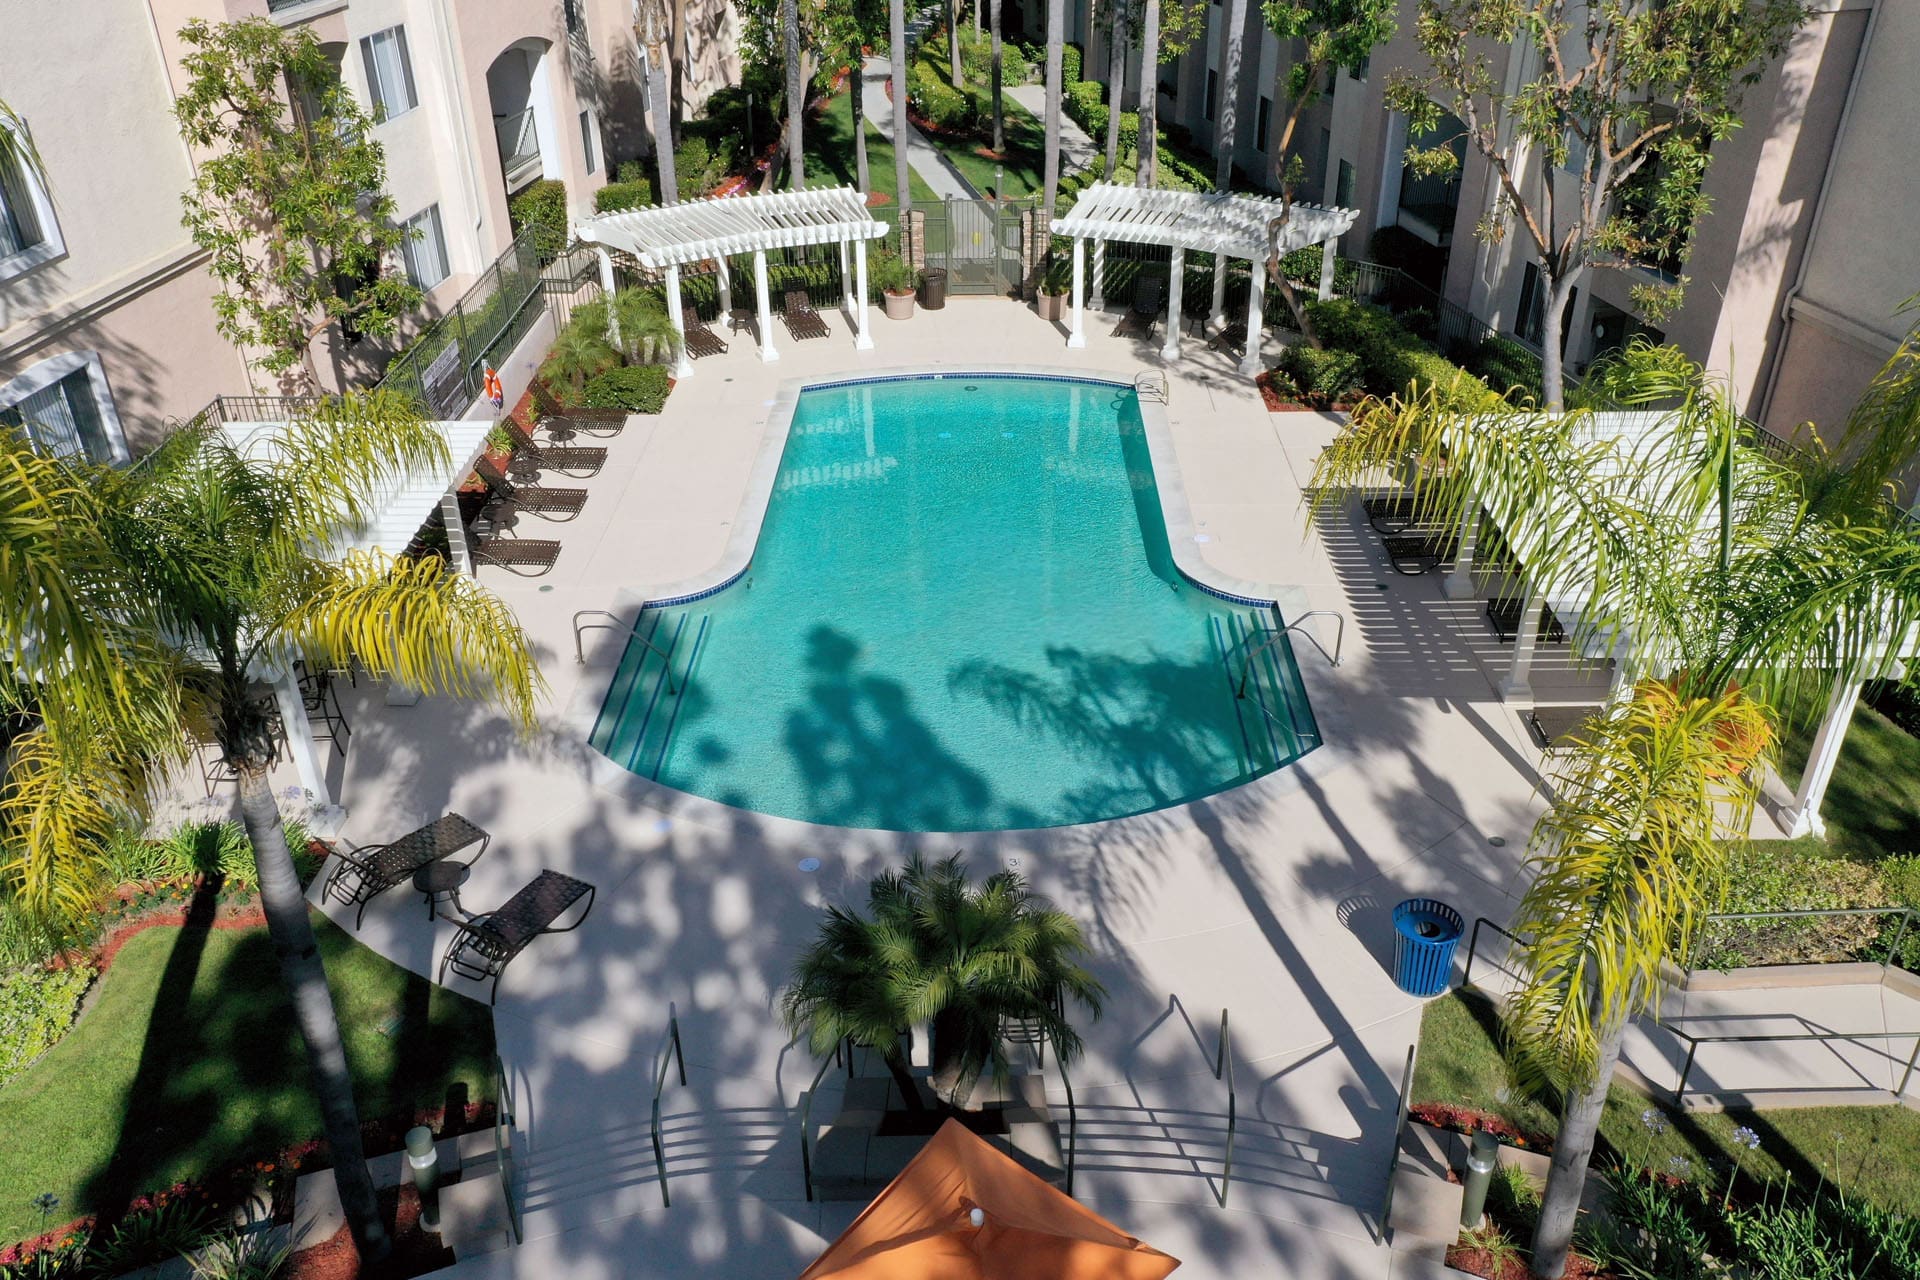 Apartments in Aliso Viejo CA-Aventine Apartments Swimming Pool Surrounded by Palm Trees, Lounge Chairs, and Gazebos